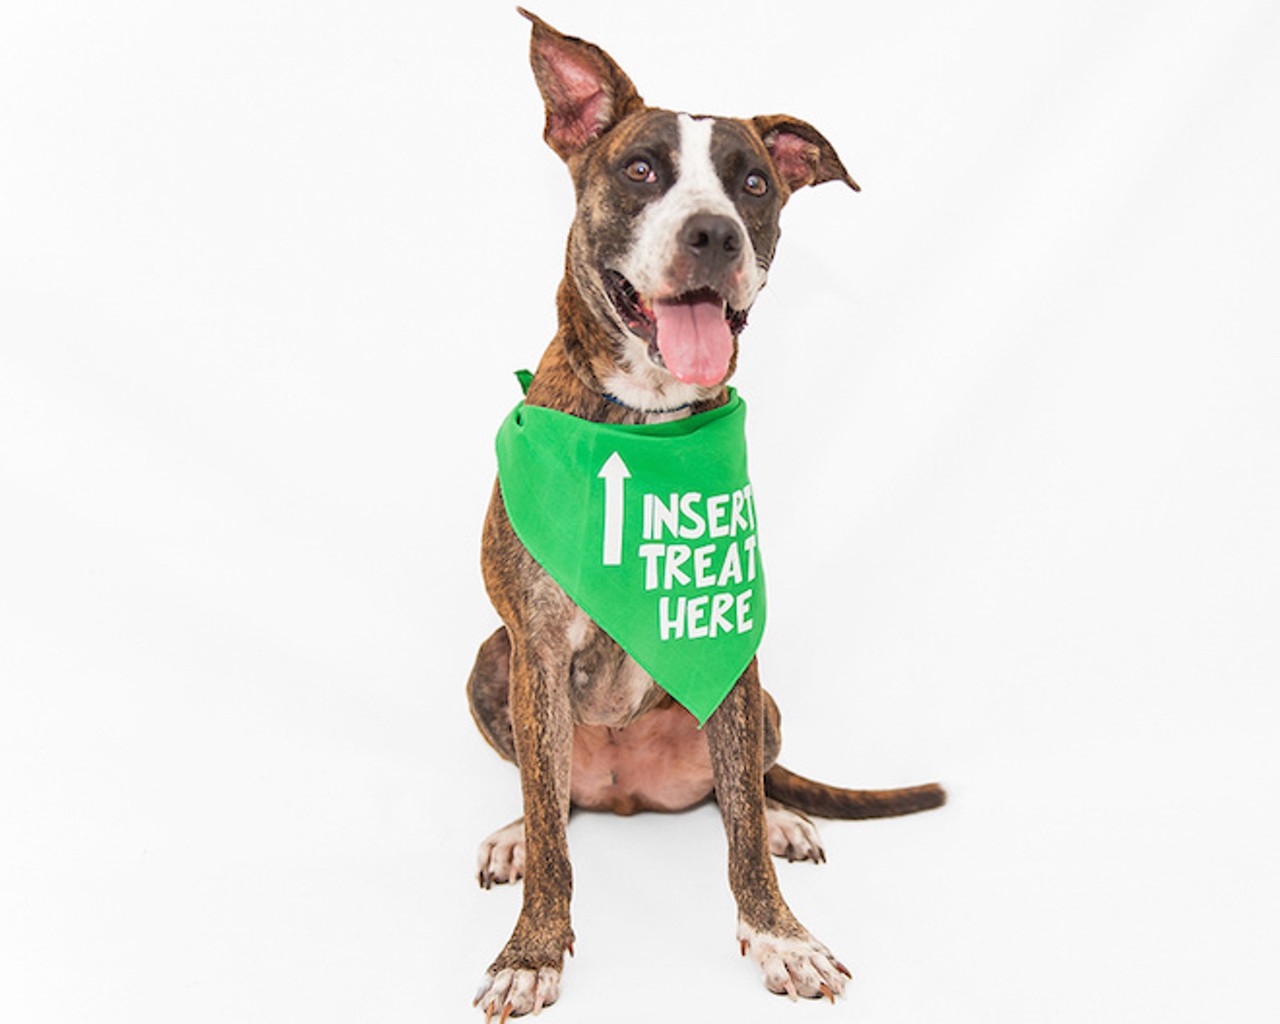 The shelter is full! Here are 50 awesome dogs and cats who need homes now.